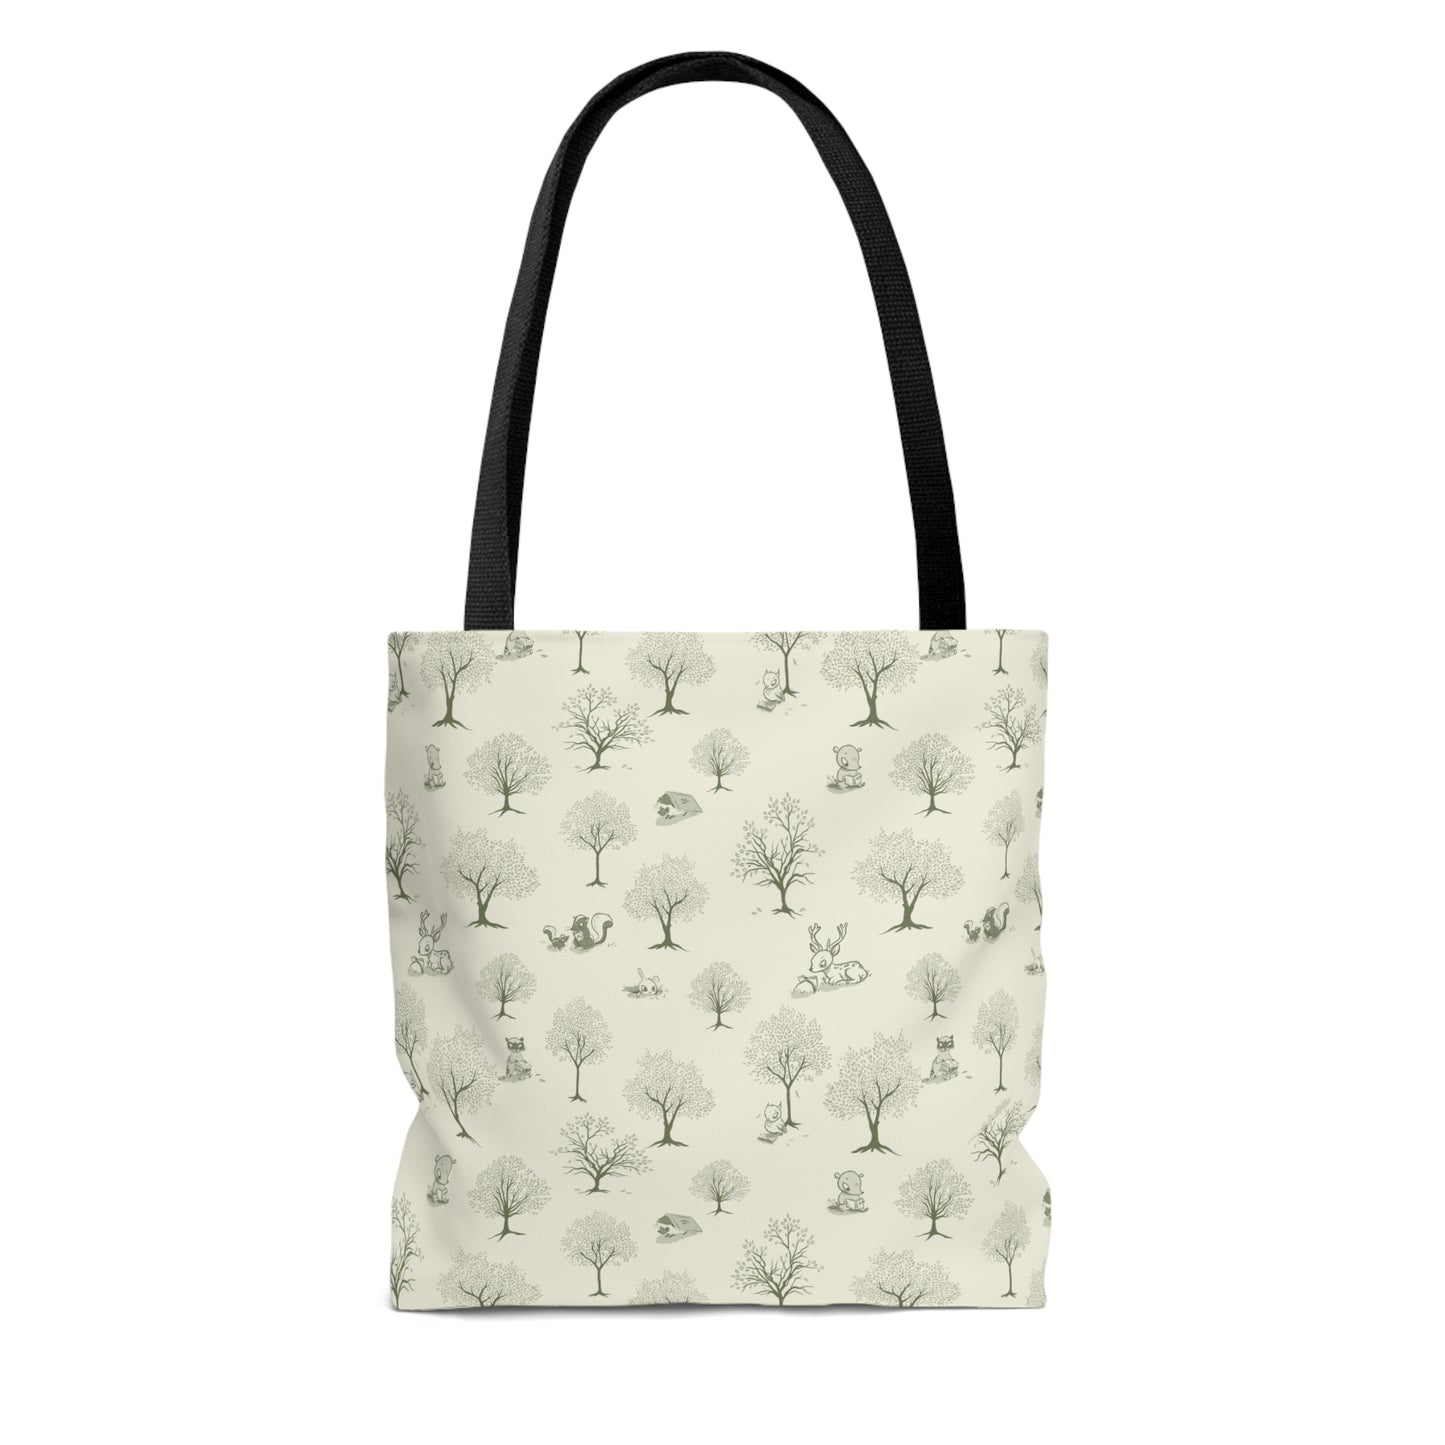 Story Time Tote Bag